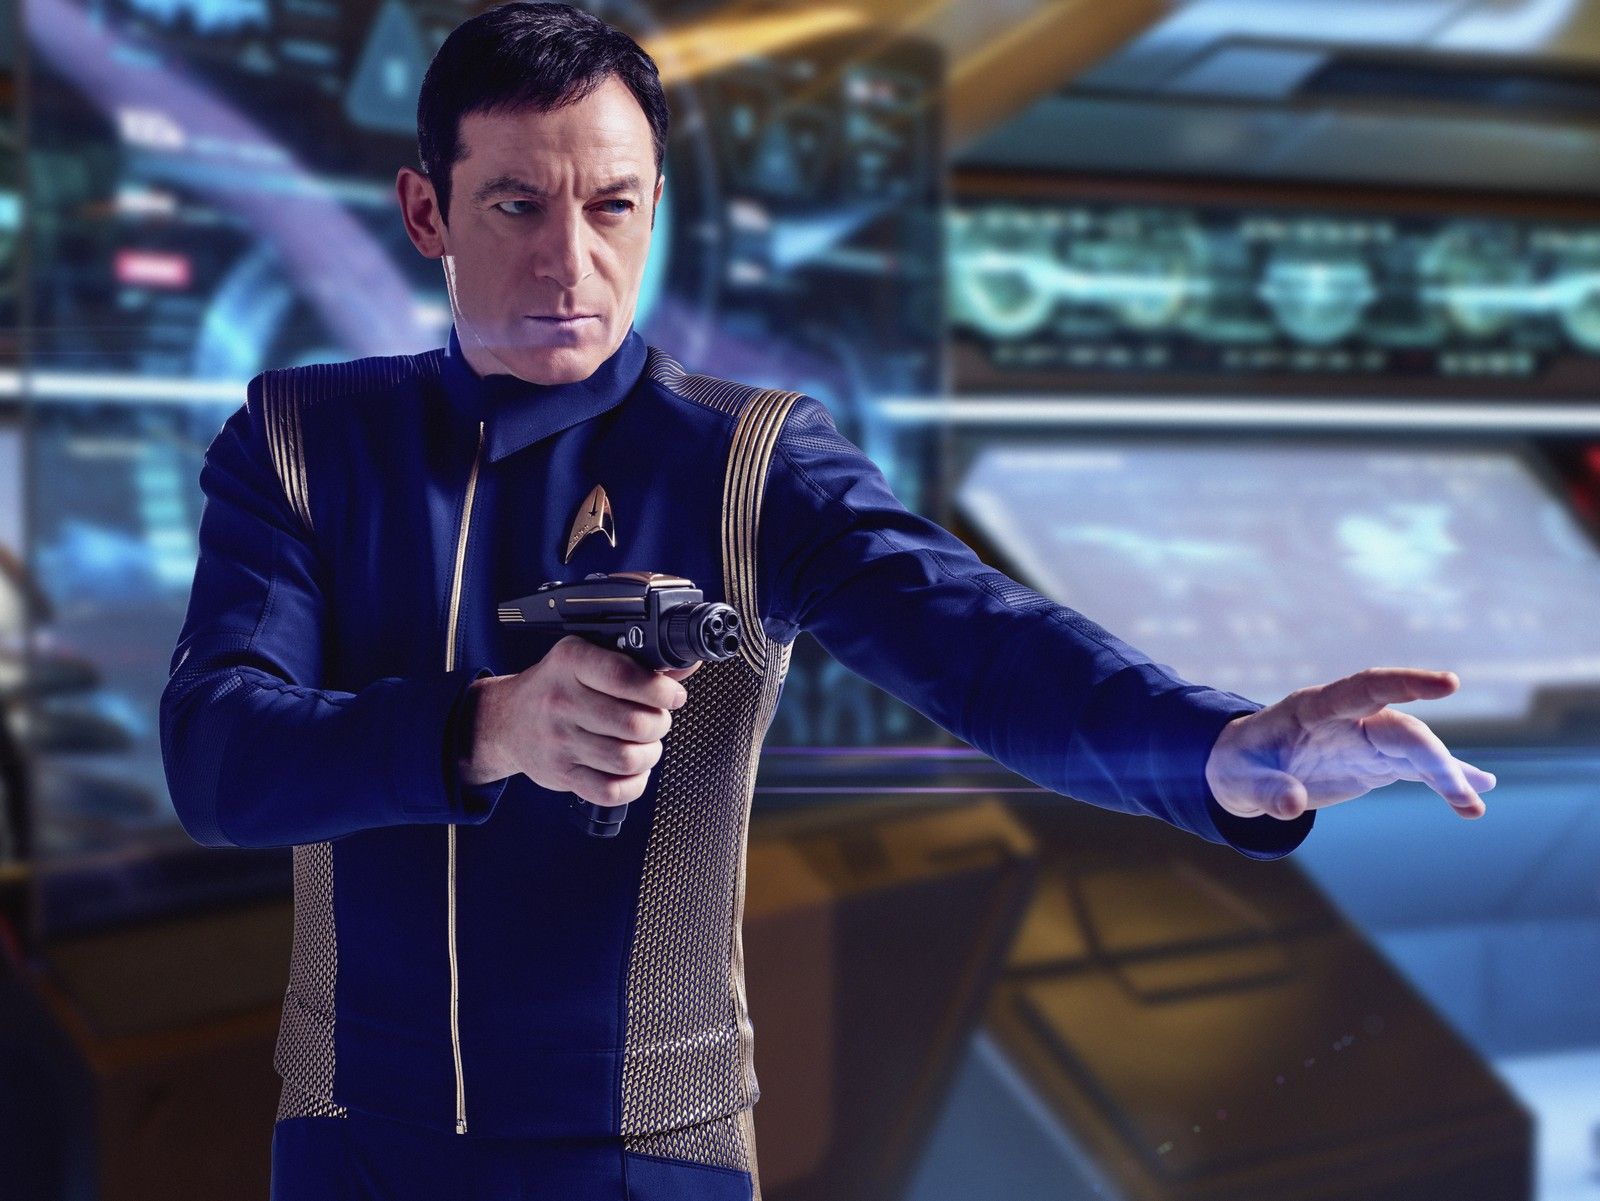 Check Out 14 New Image From 'Star Trek: Discovery'